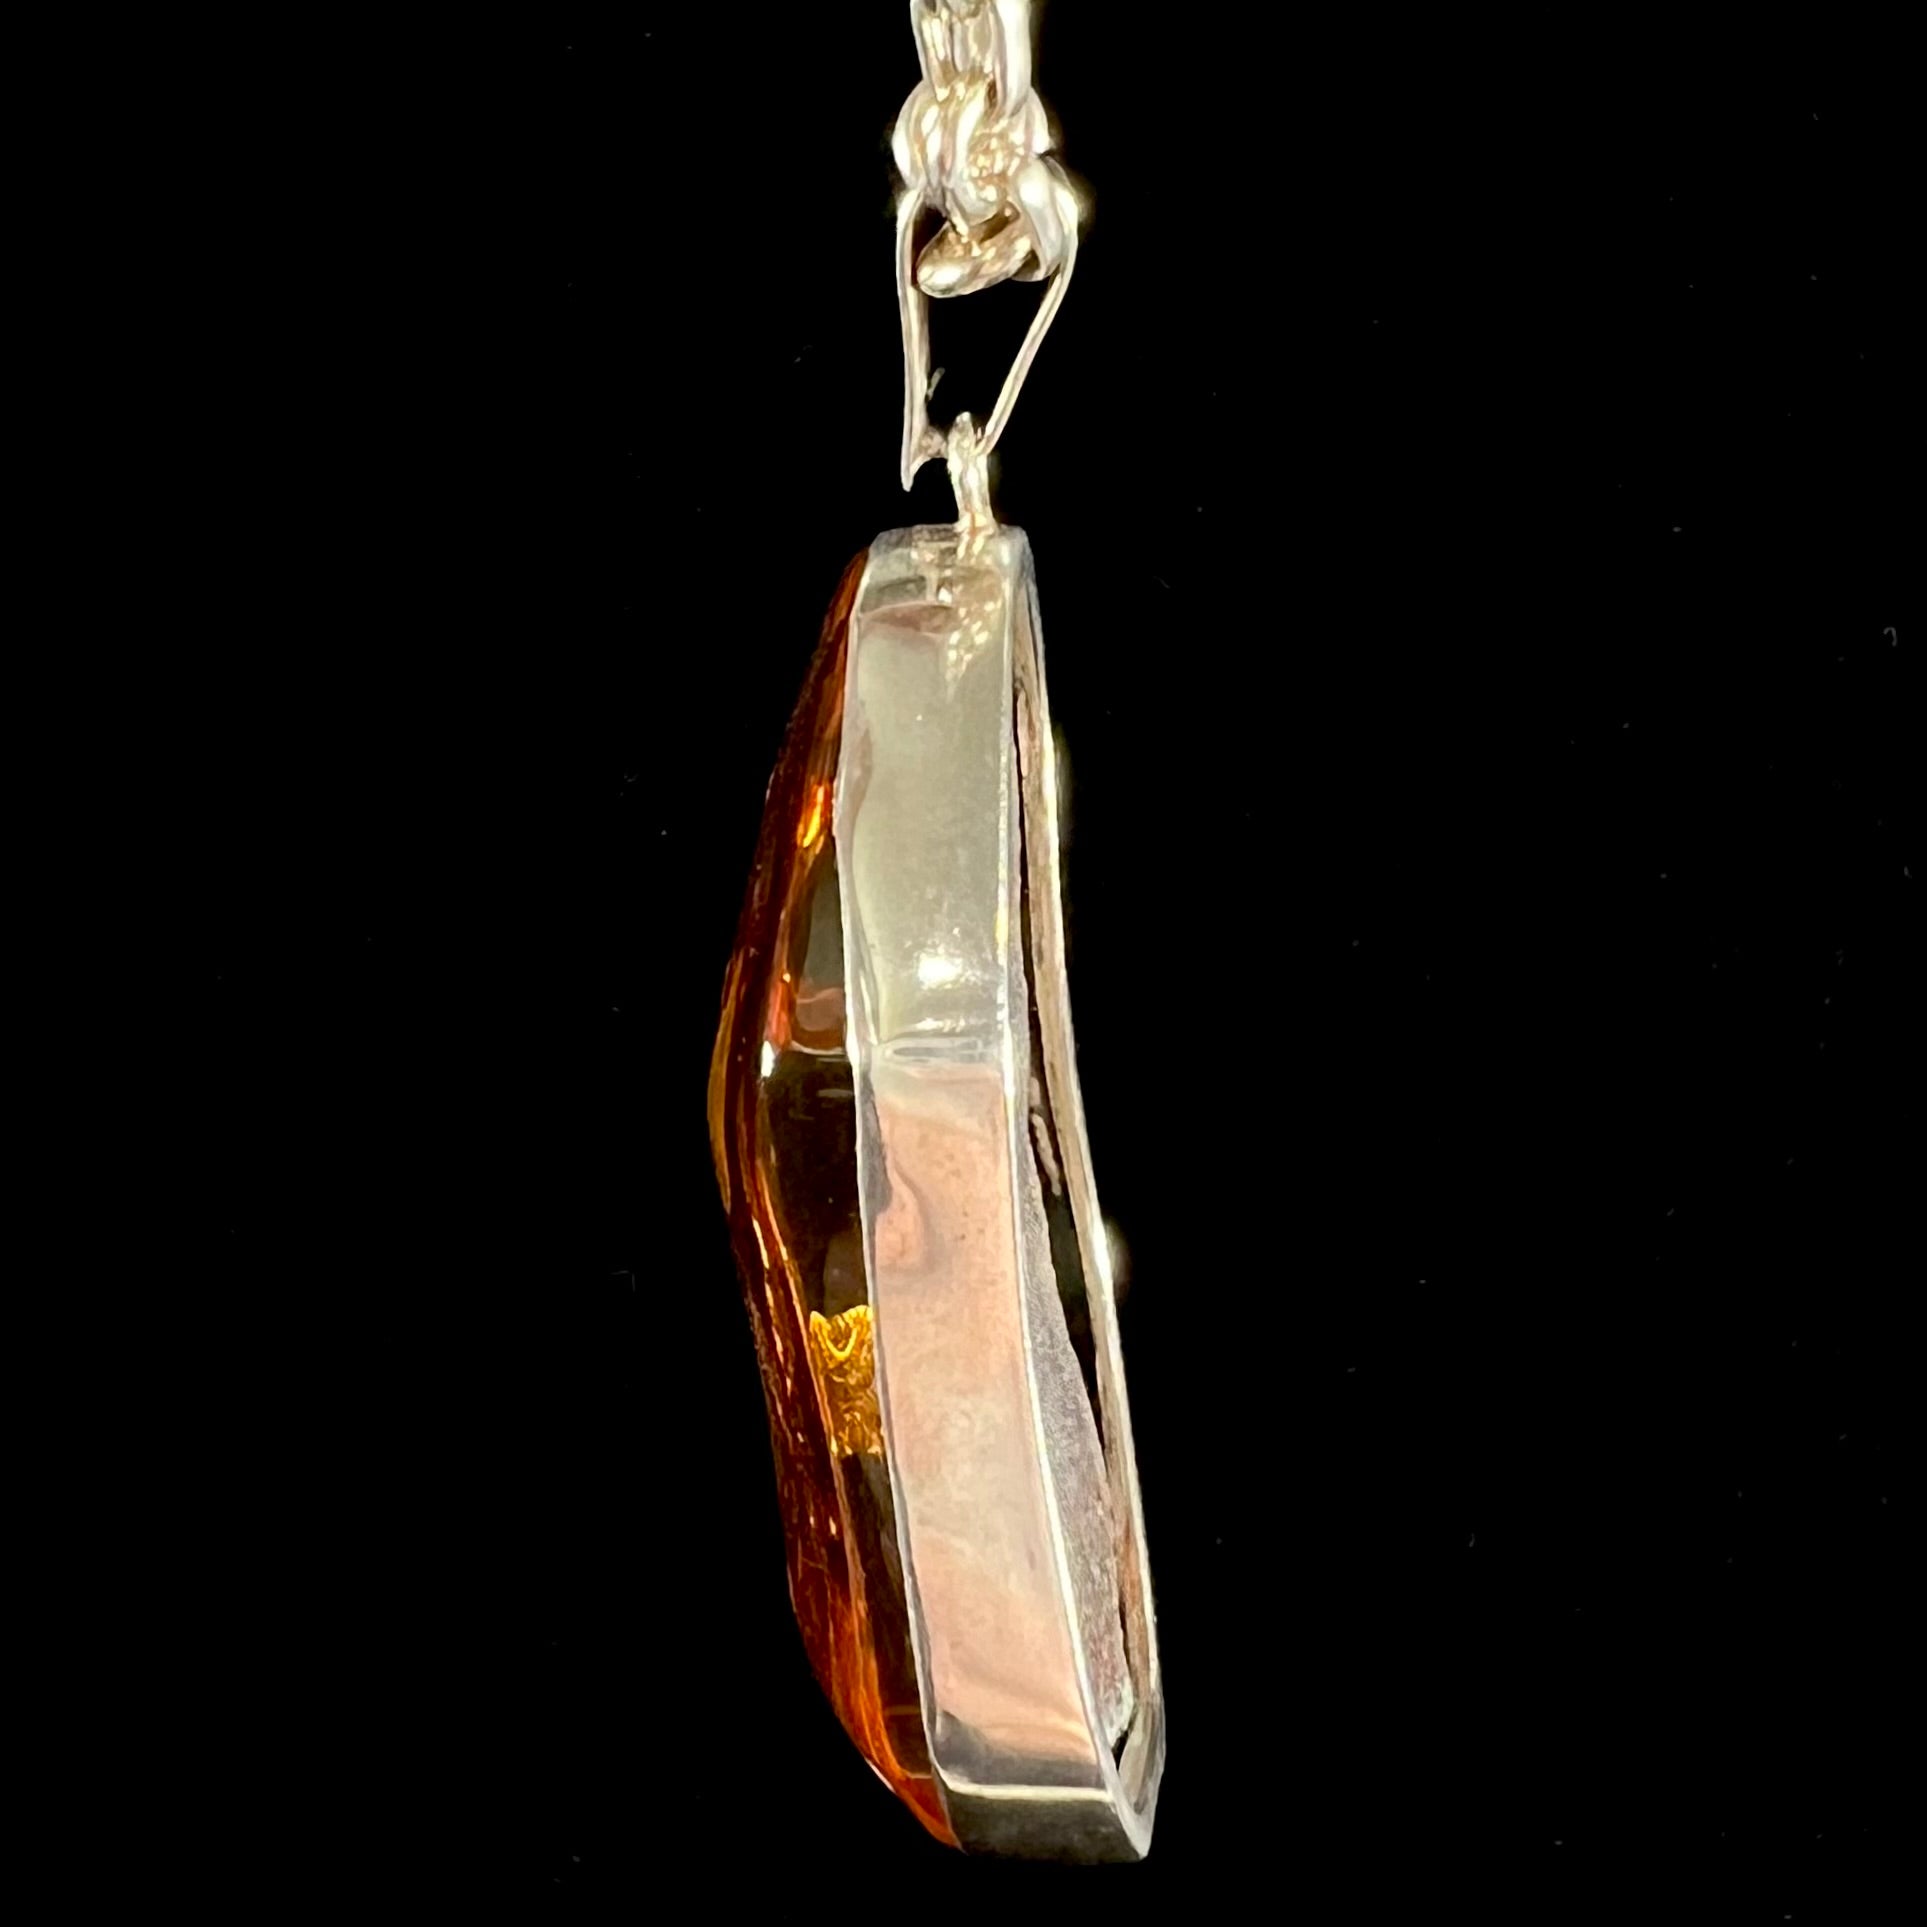 A sterling silver pendant set with a large natural amber stone.  The amber has sun spangled inclusions.